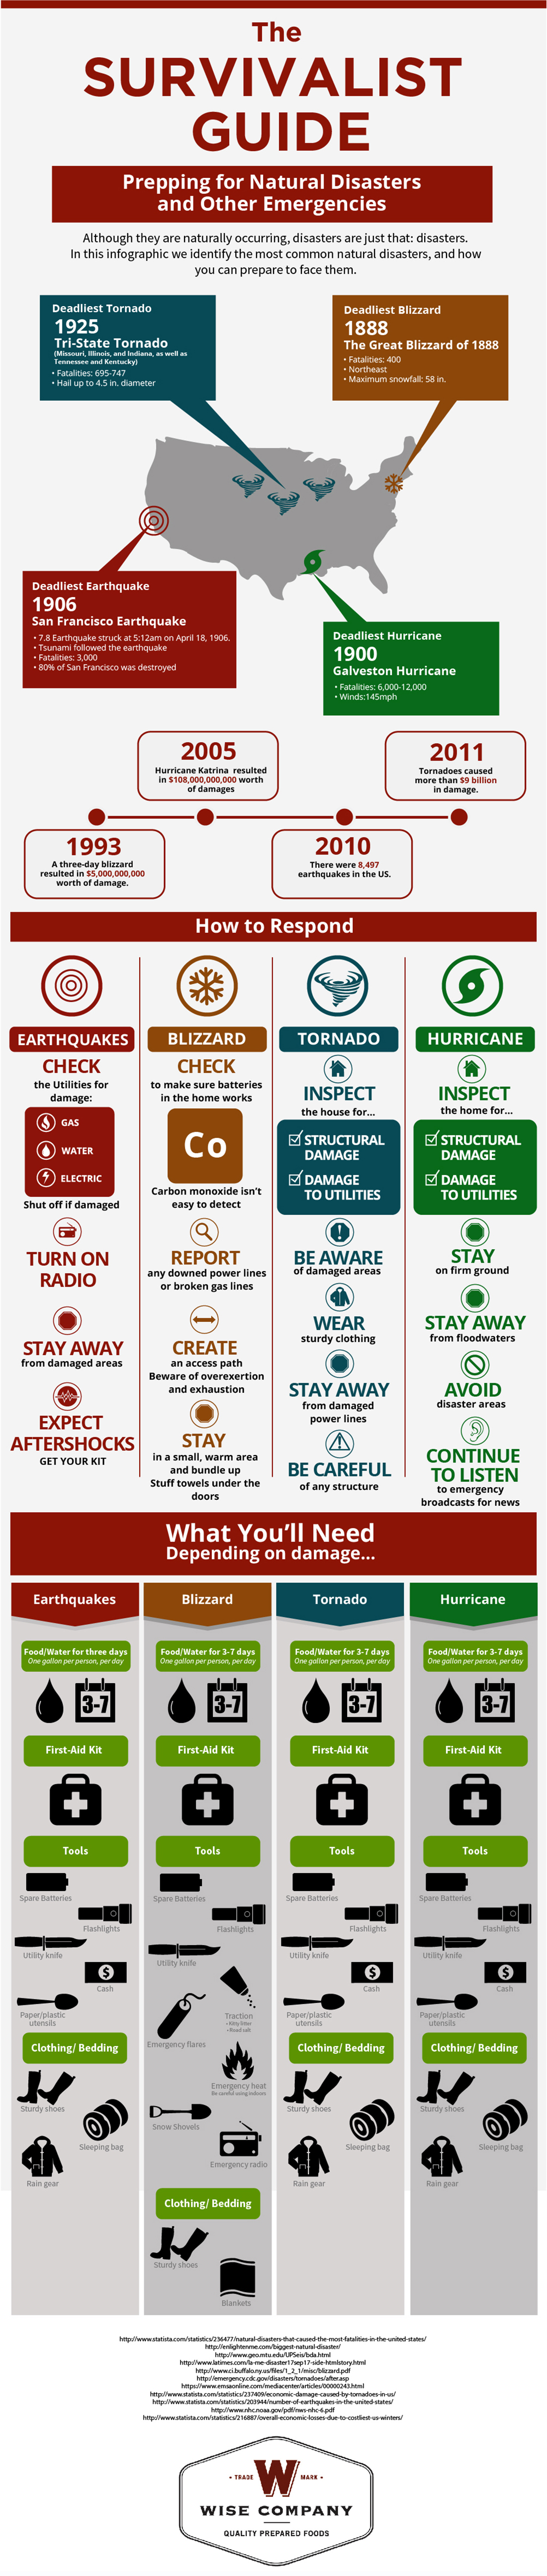 The Survivalist Guide: Prepping for Natural Disasters & Other Emergencies